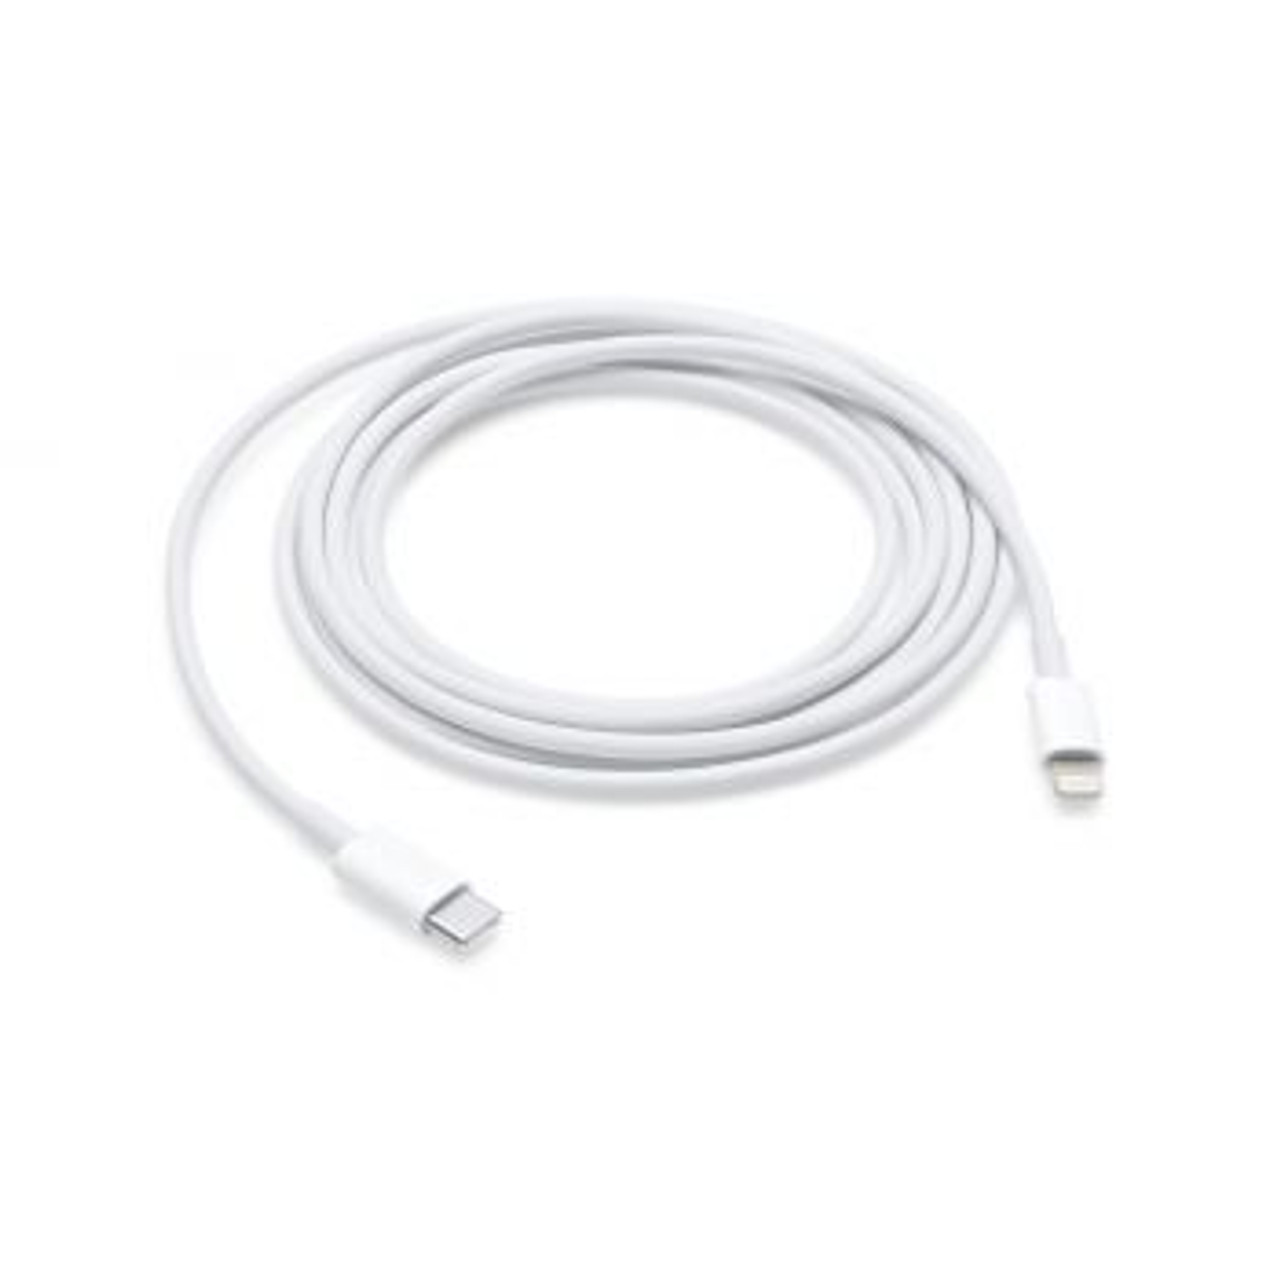 Apple USB C Charge Cable 2m, MLL82ZM-A, AYOUB COMPUTERS